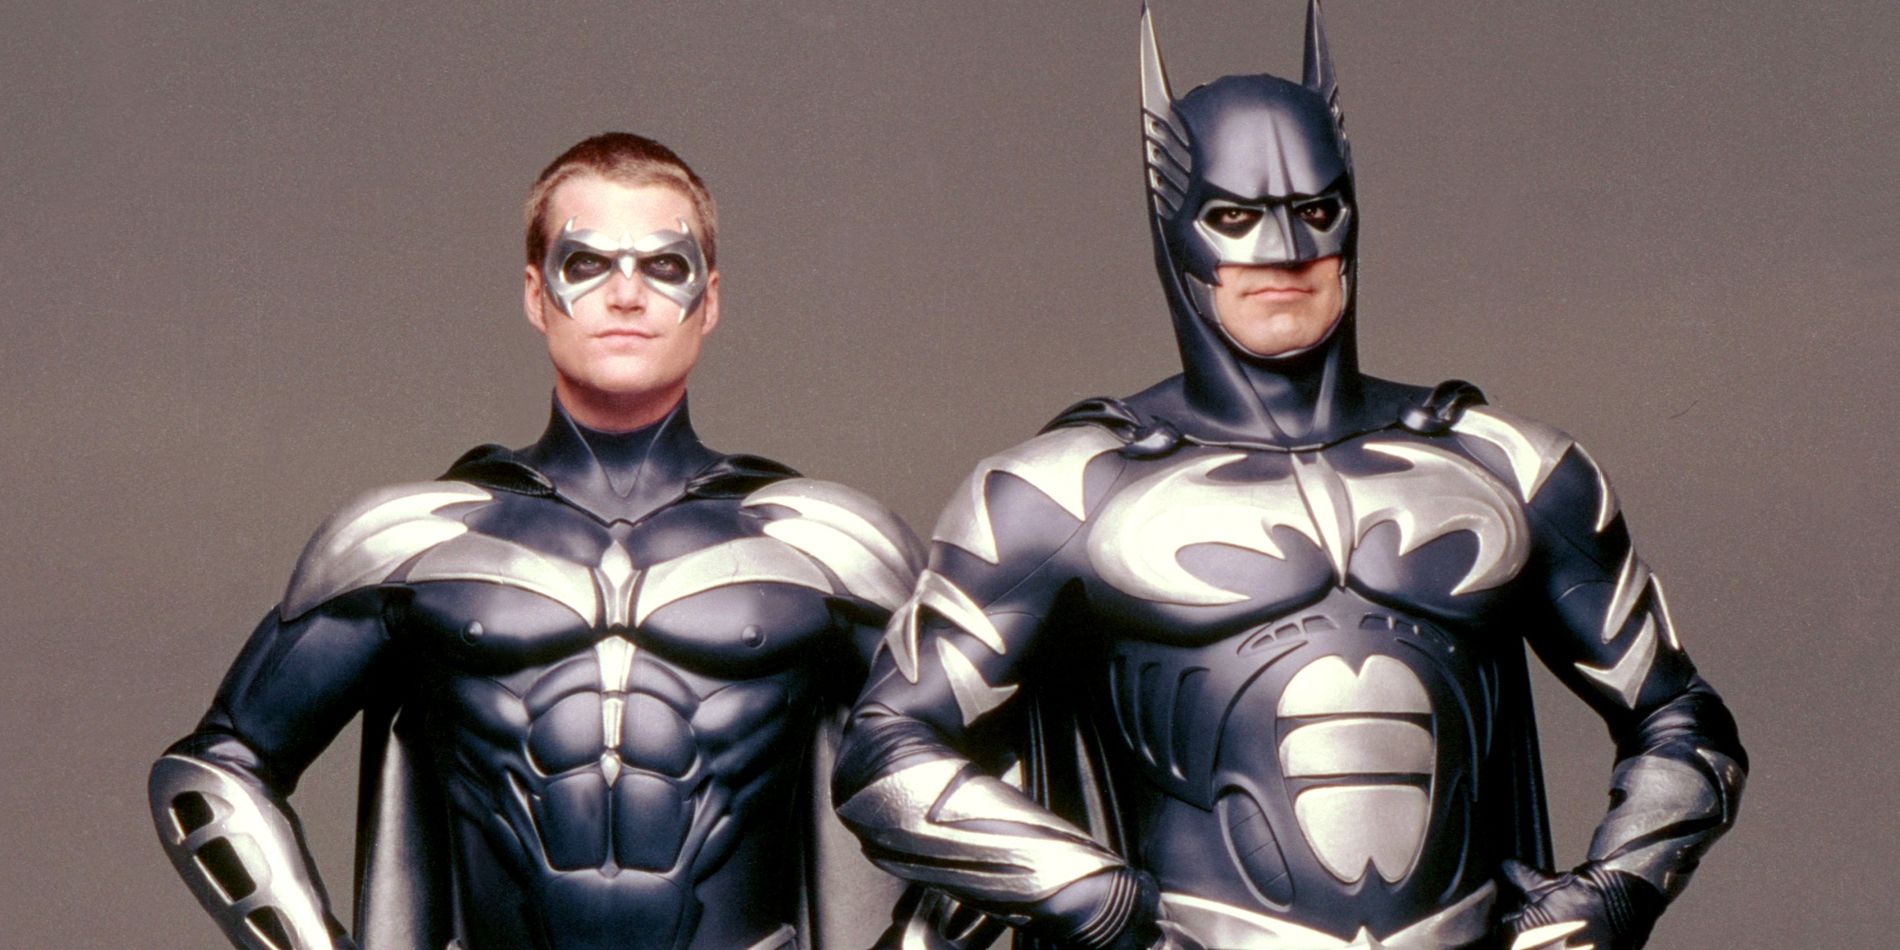 Joel Schumacher Says He Shouldn't Have Made Any Of His Batman Movies